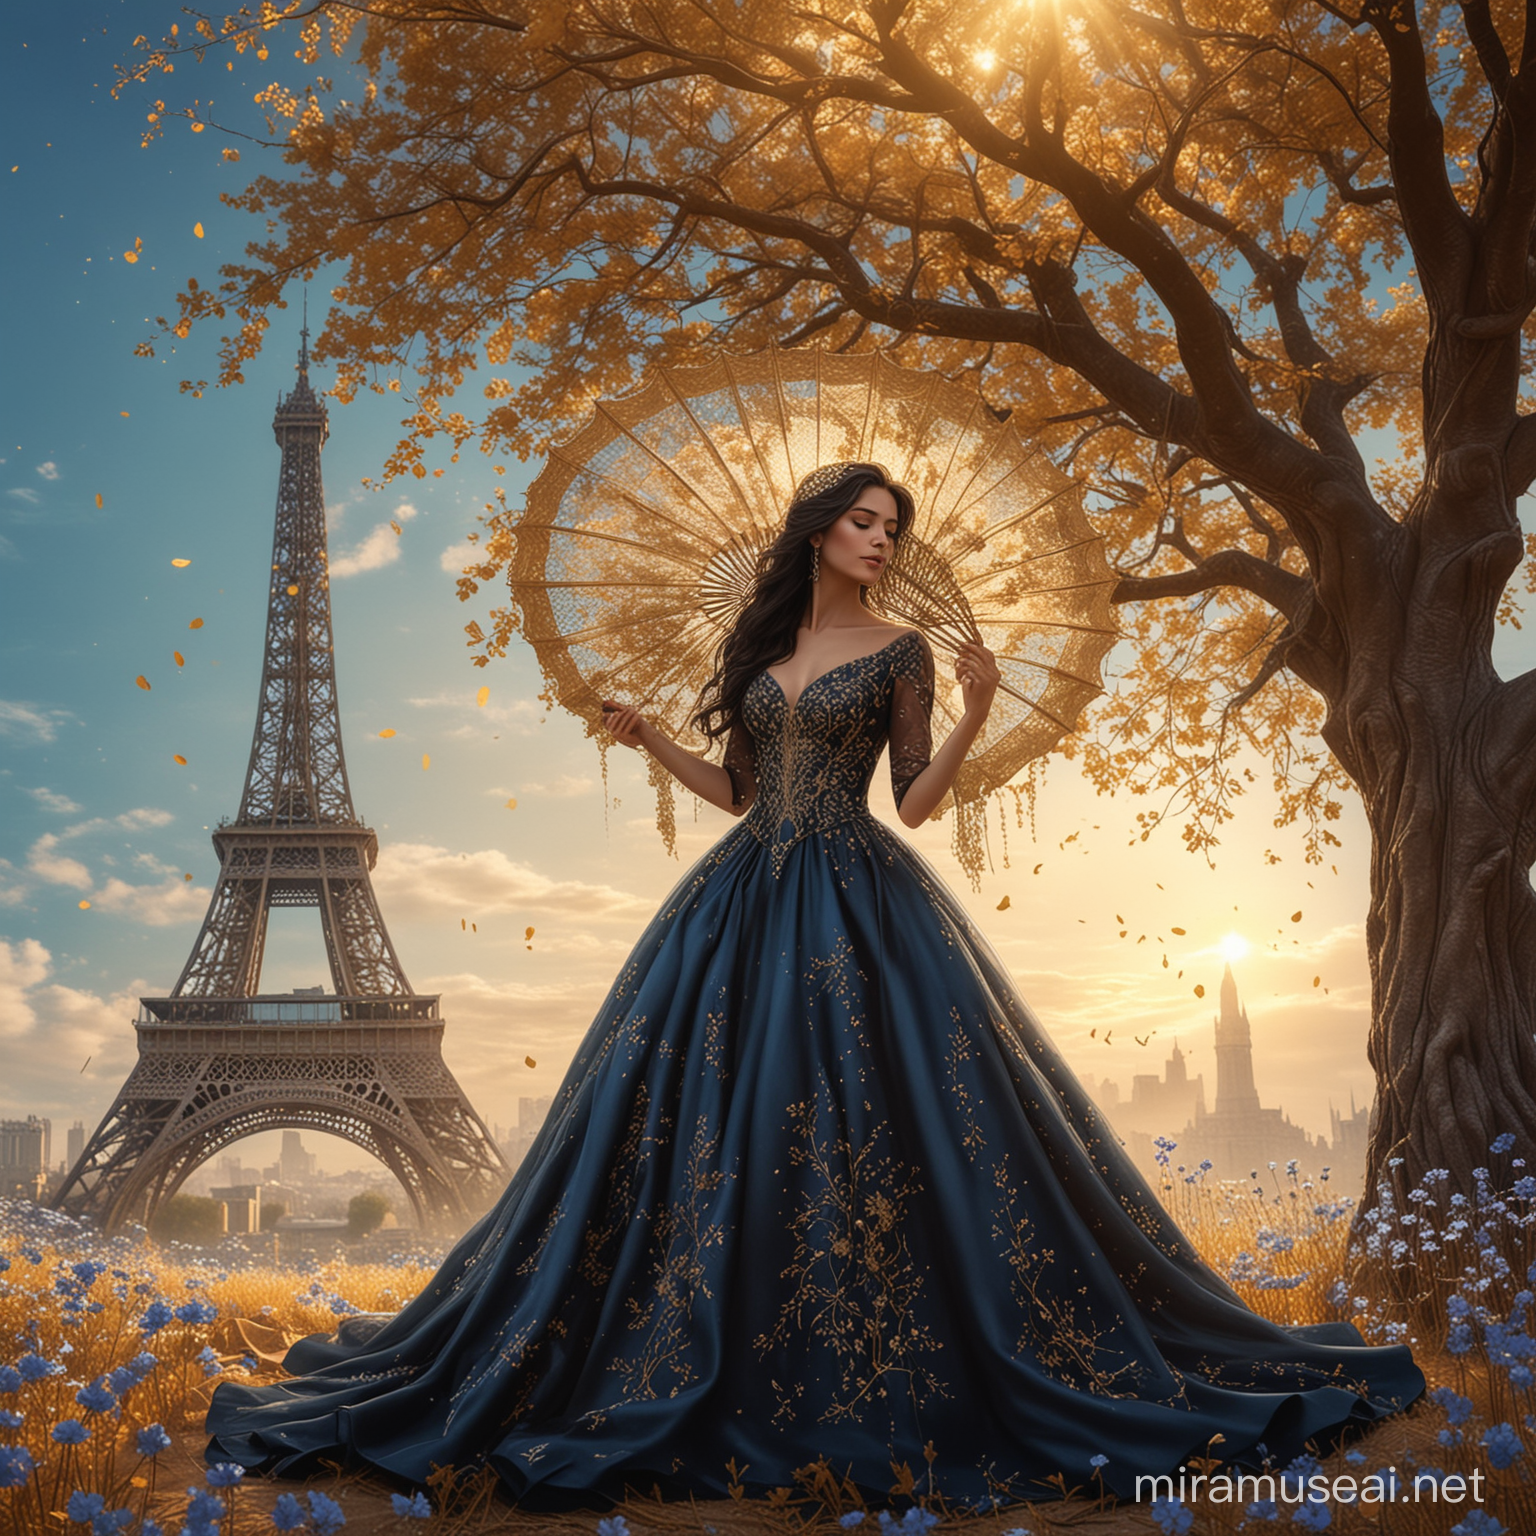 A beautiful woman, standing up under a big floral tree, in a dreamy land, hiding her face with an elegant fan, surrounded by golden dust and small dark blue flowers. Long wavy black hair. Elegant long black dress,embroidering bridal veil, haute couture. Background sky with golden light. Background golden tower effel. 8k, fantasy, illustration, digital art, illustration art, fantasy art, fantasy styl